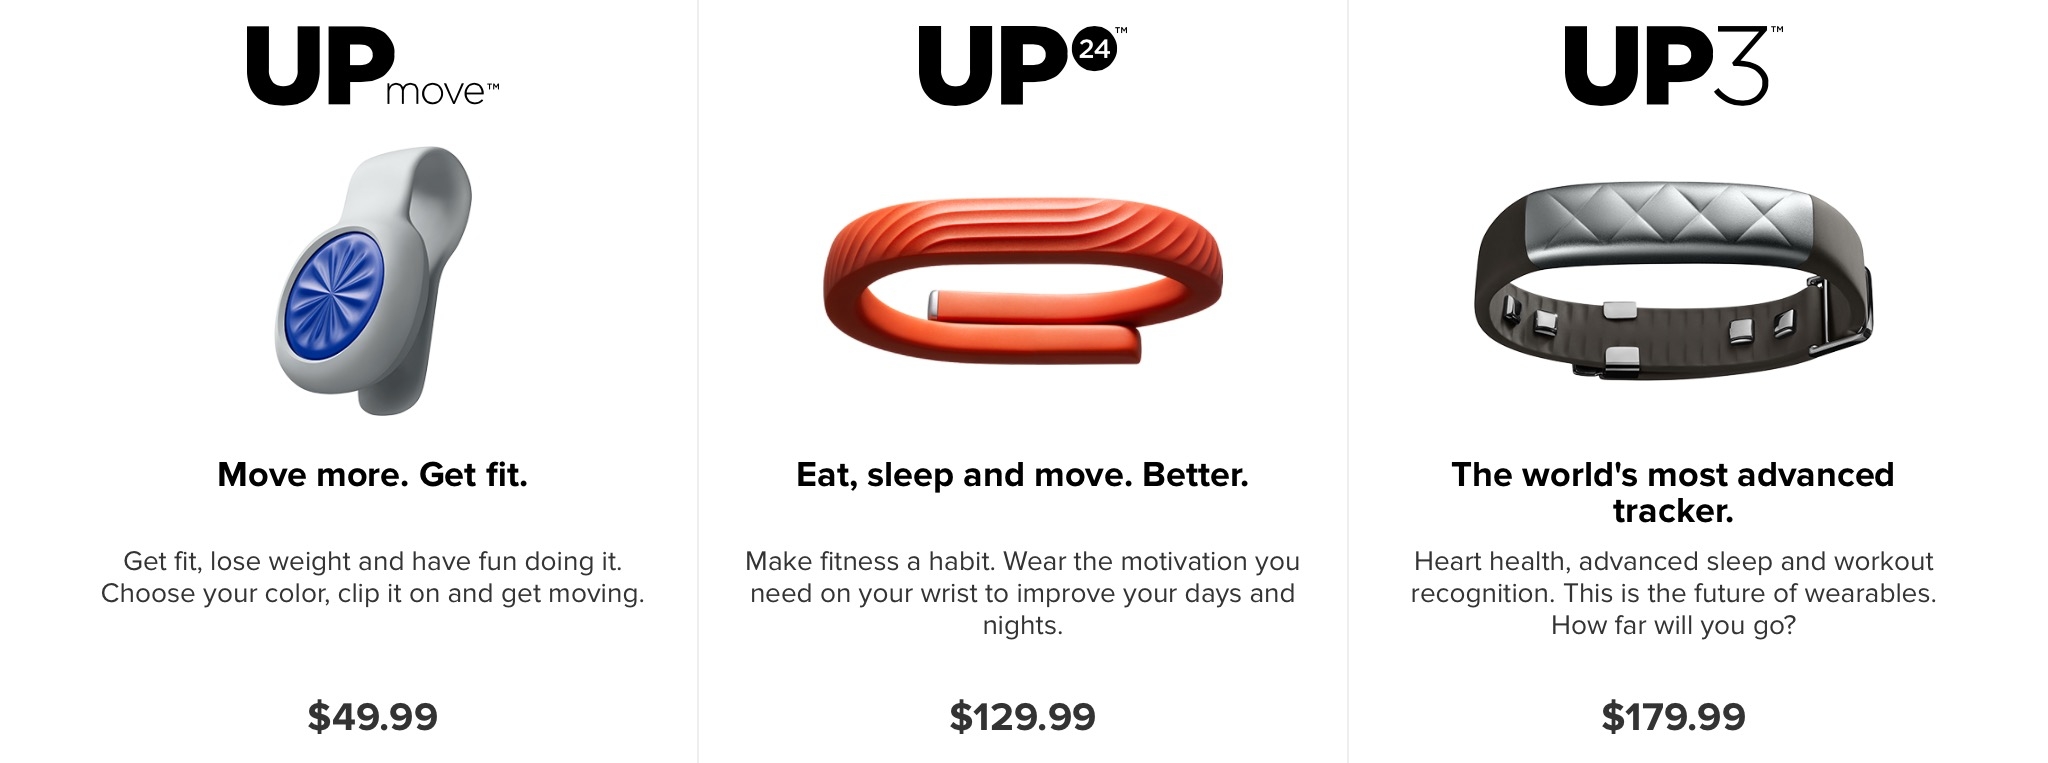 Jawbone Up24, Now With Bluebooth, Can Nudge You to Get Up and Move - ABC  News